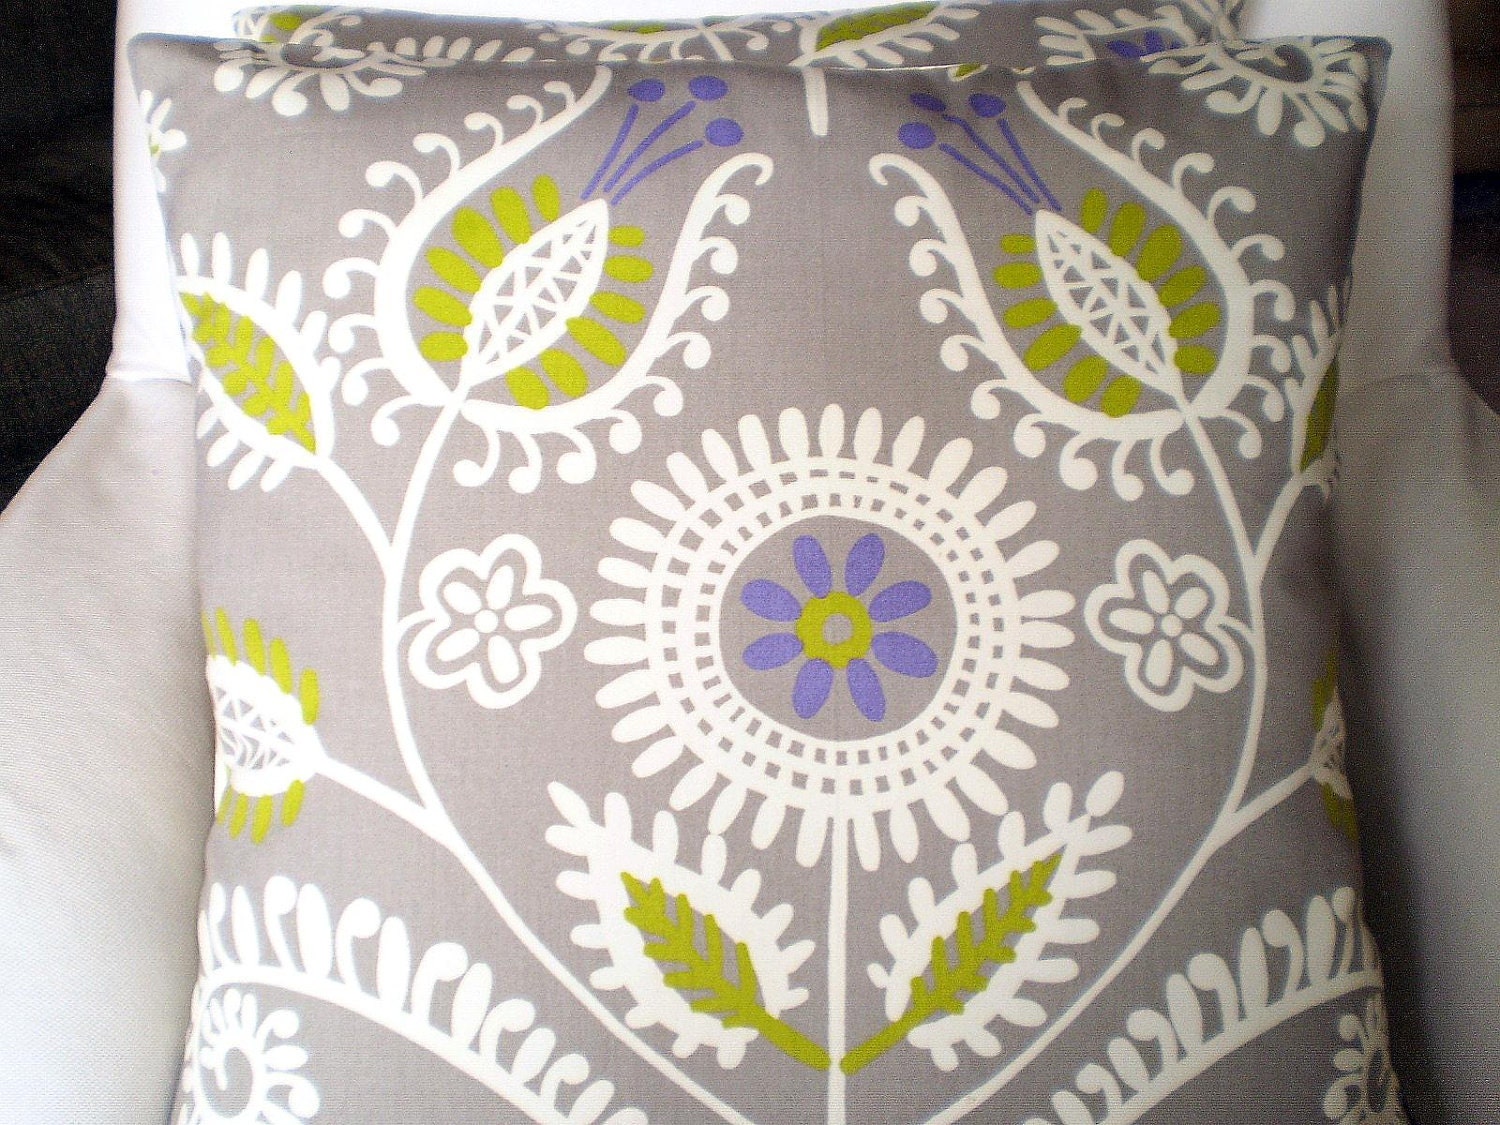 Decorative Pillows Accent Pillows, Throw Pillow Cushion Covers Gray Lime Green Purple Cream New Waverly - Two 18 x 18 - fabricjunkie1640